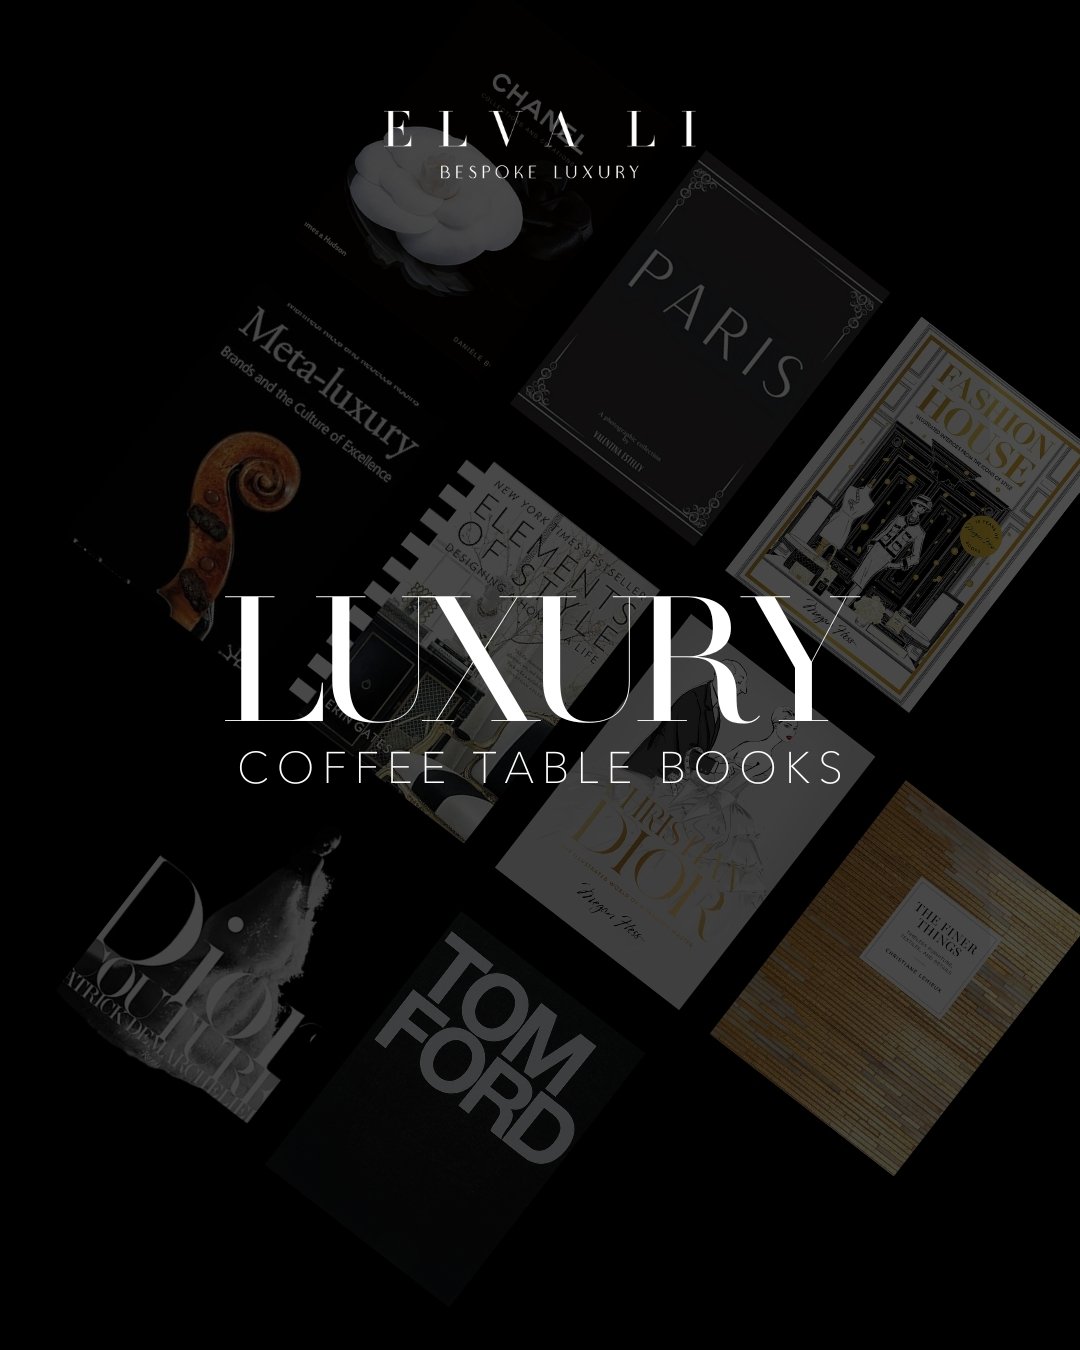 I was with one of my luxury clients yesterday and she loved my luxury office setting and asked what luxury coffee table books I recommend. 

So I would like to share with you as well the 12 luxury coffee books I adore. It's not just a book; it's an e